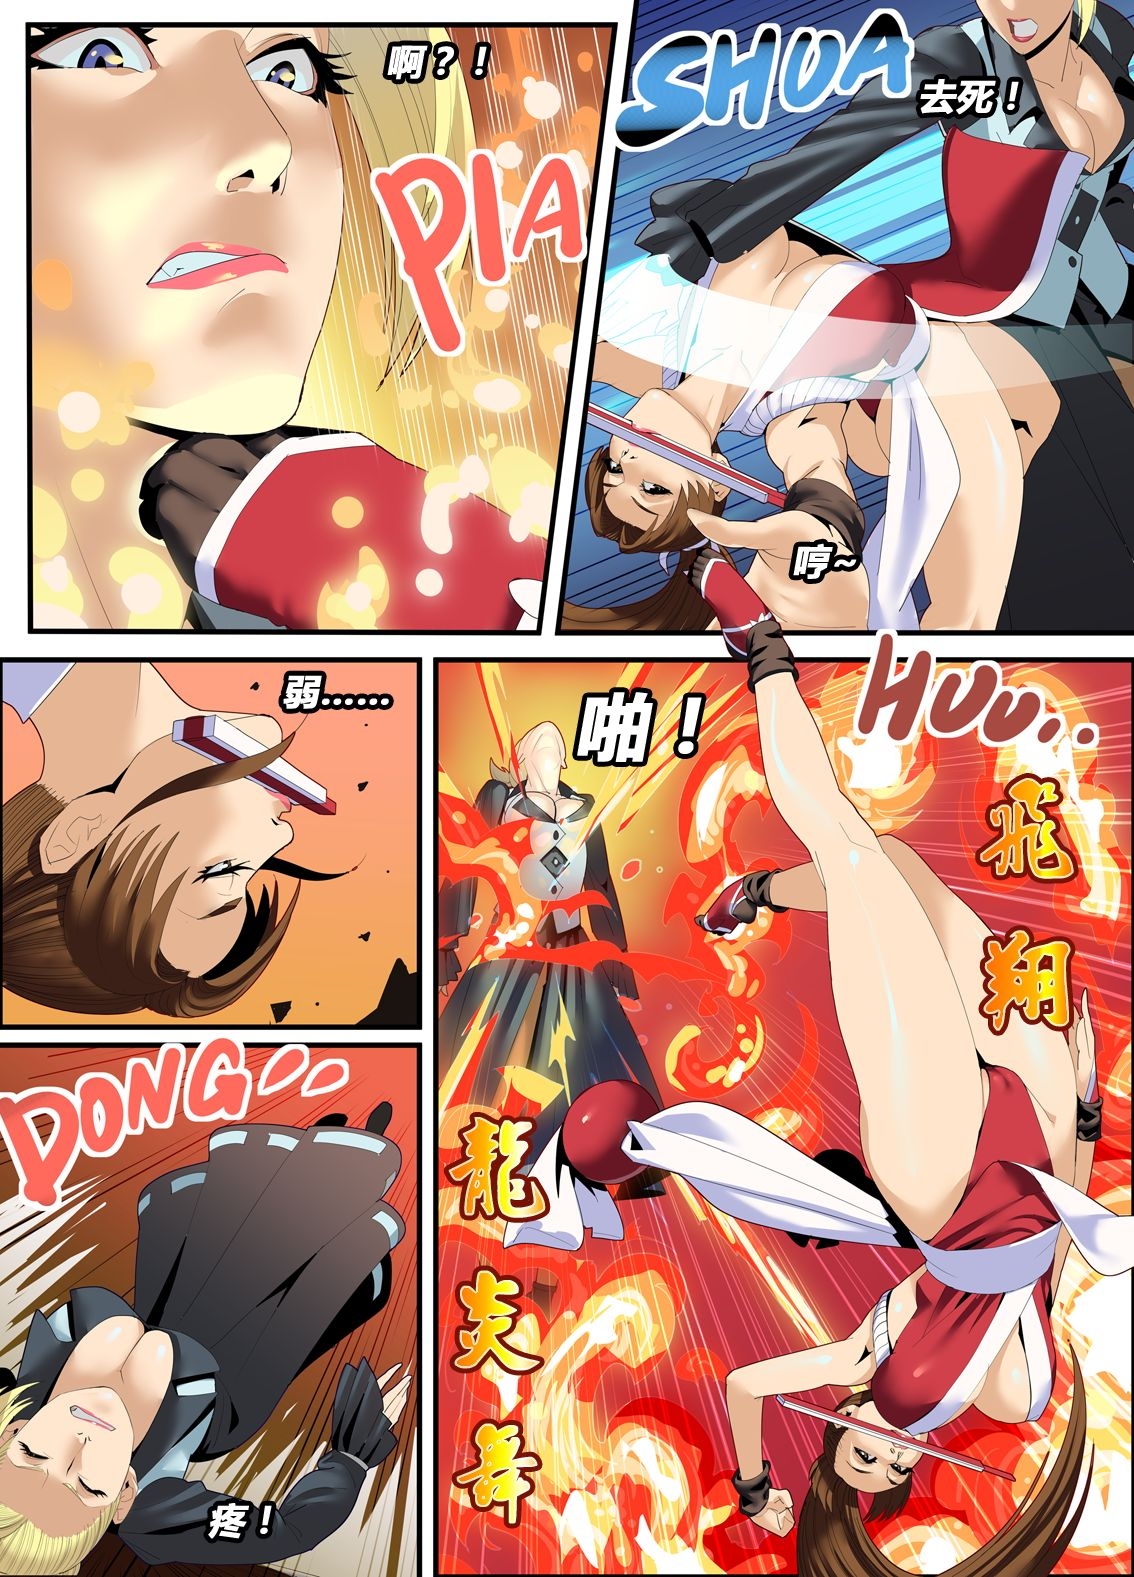 [chunlieater] The Lust of Mai Shiranui (King of Fighters) [Chinese] 6